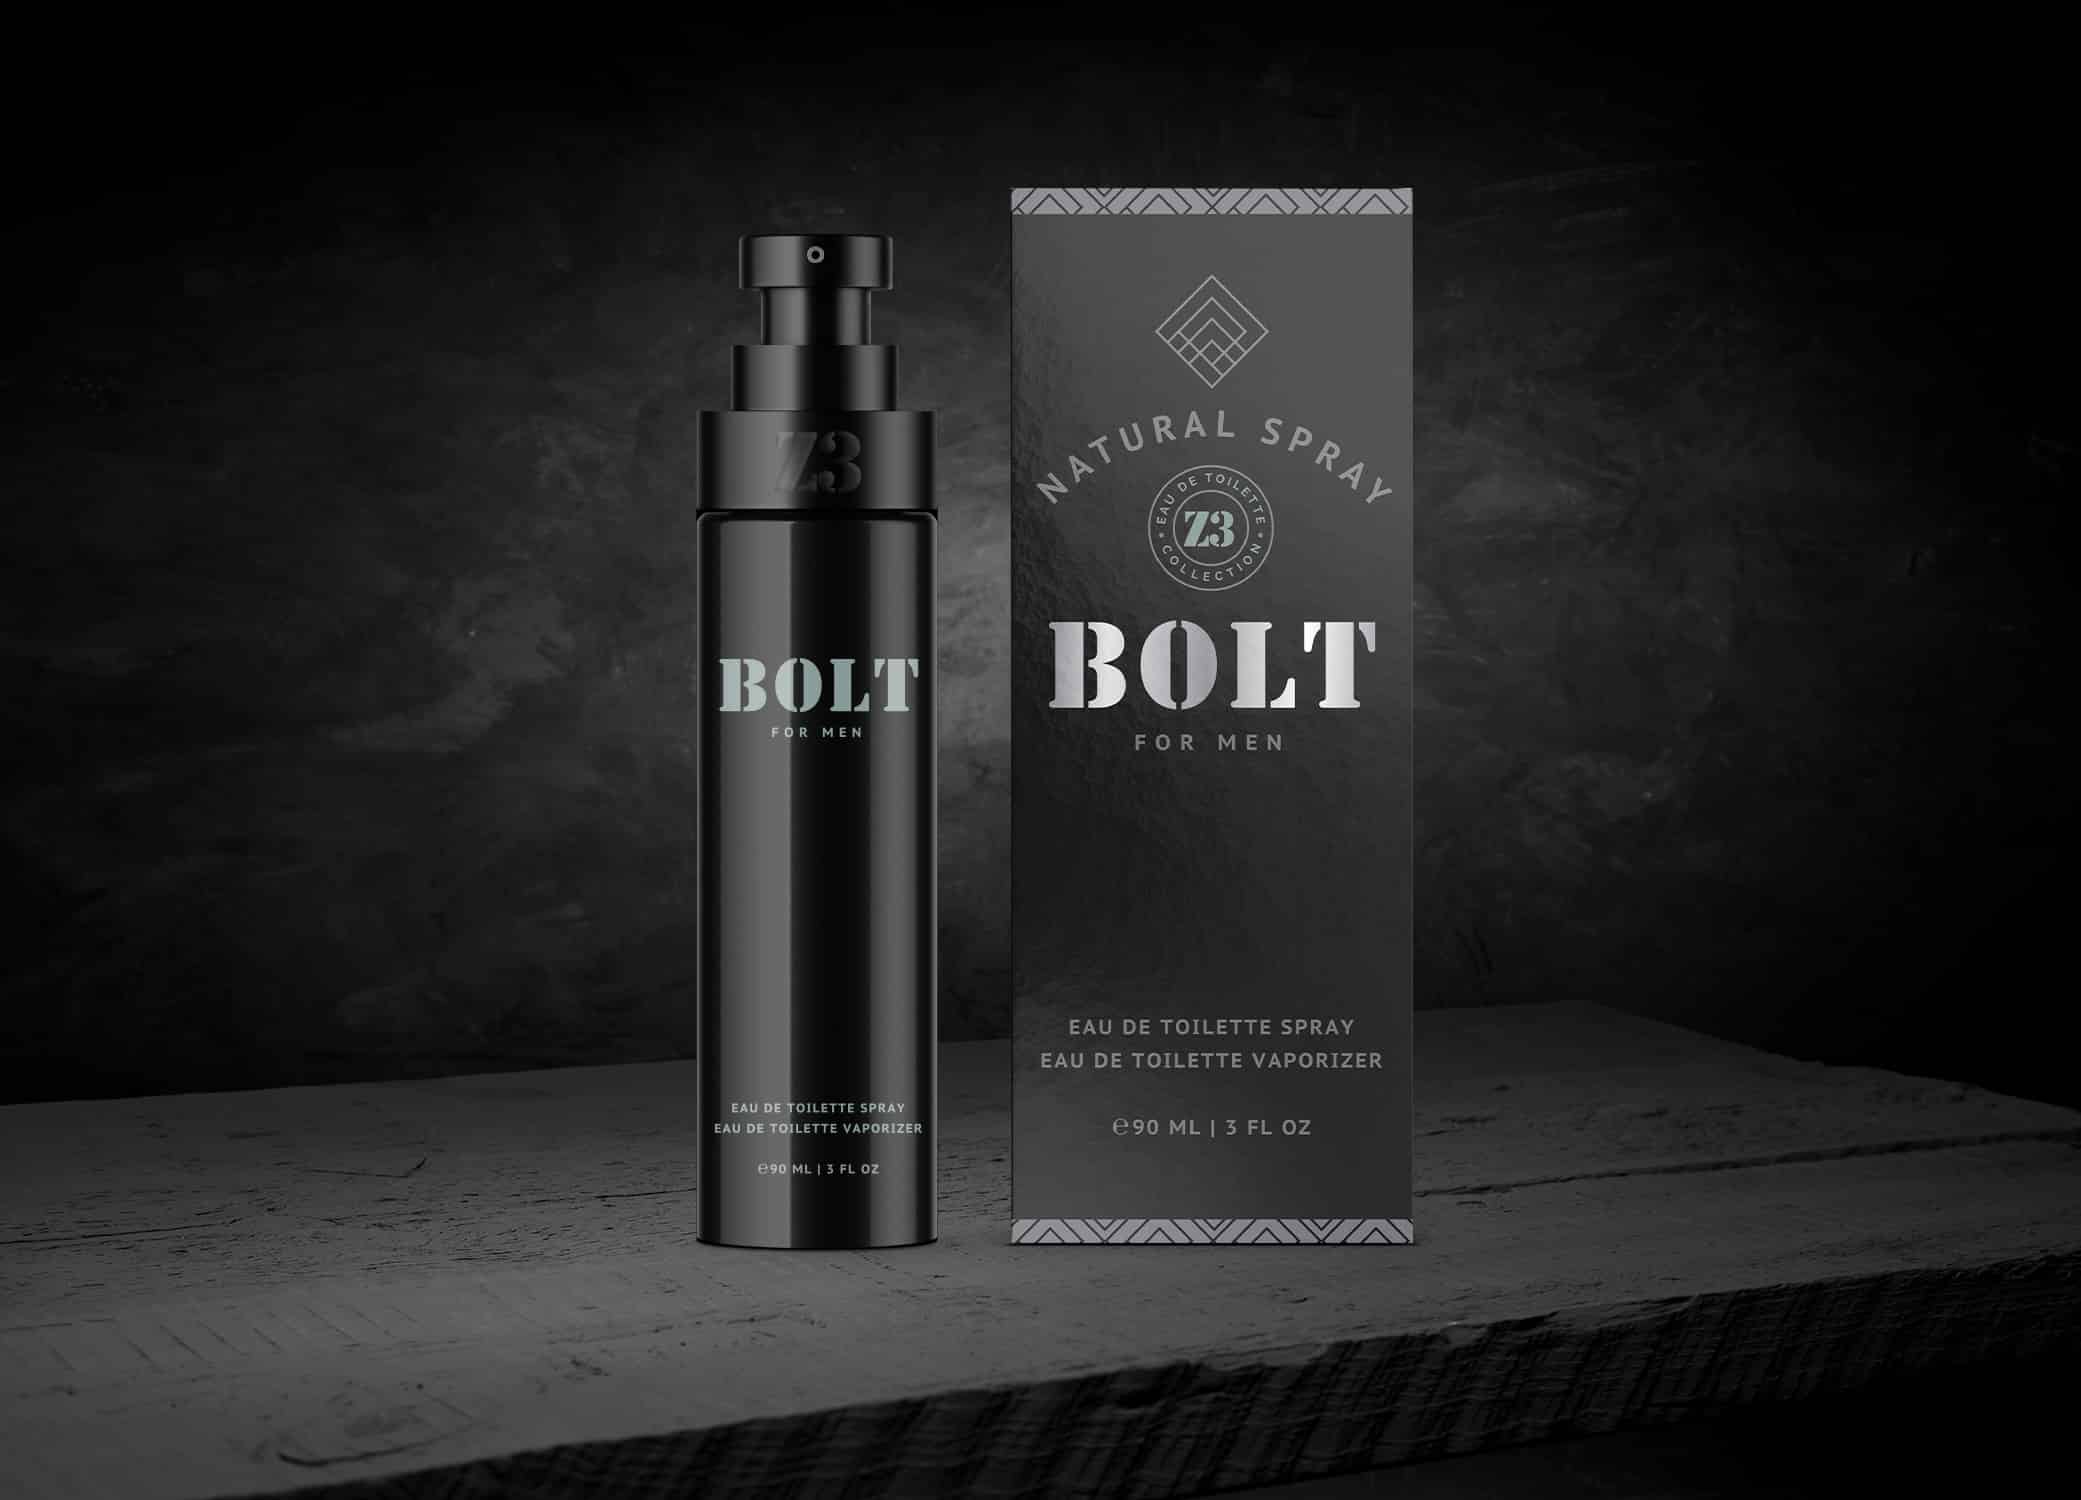 YZY Perfume men's fragrance bottle and package design in black and silver with diamond element for Z3 Bolt product.